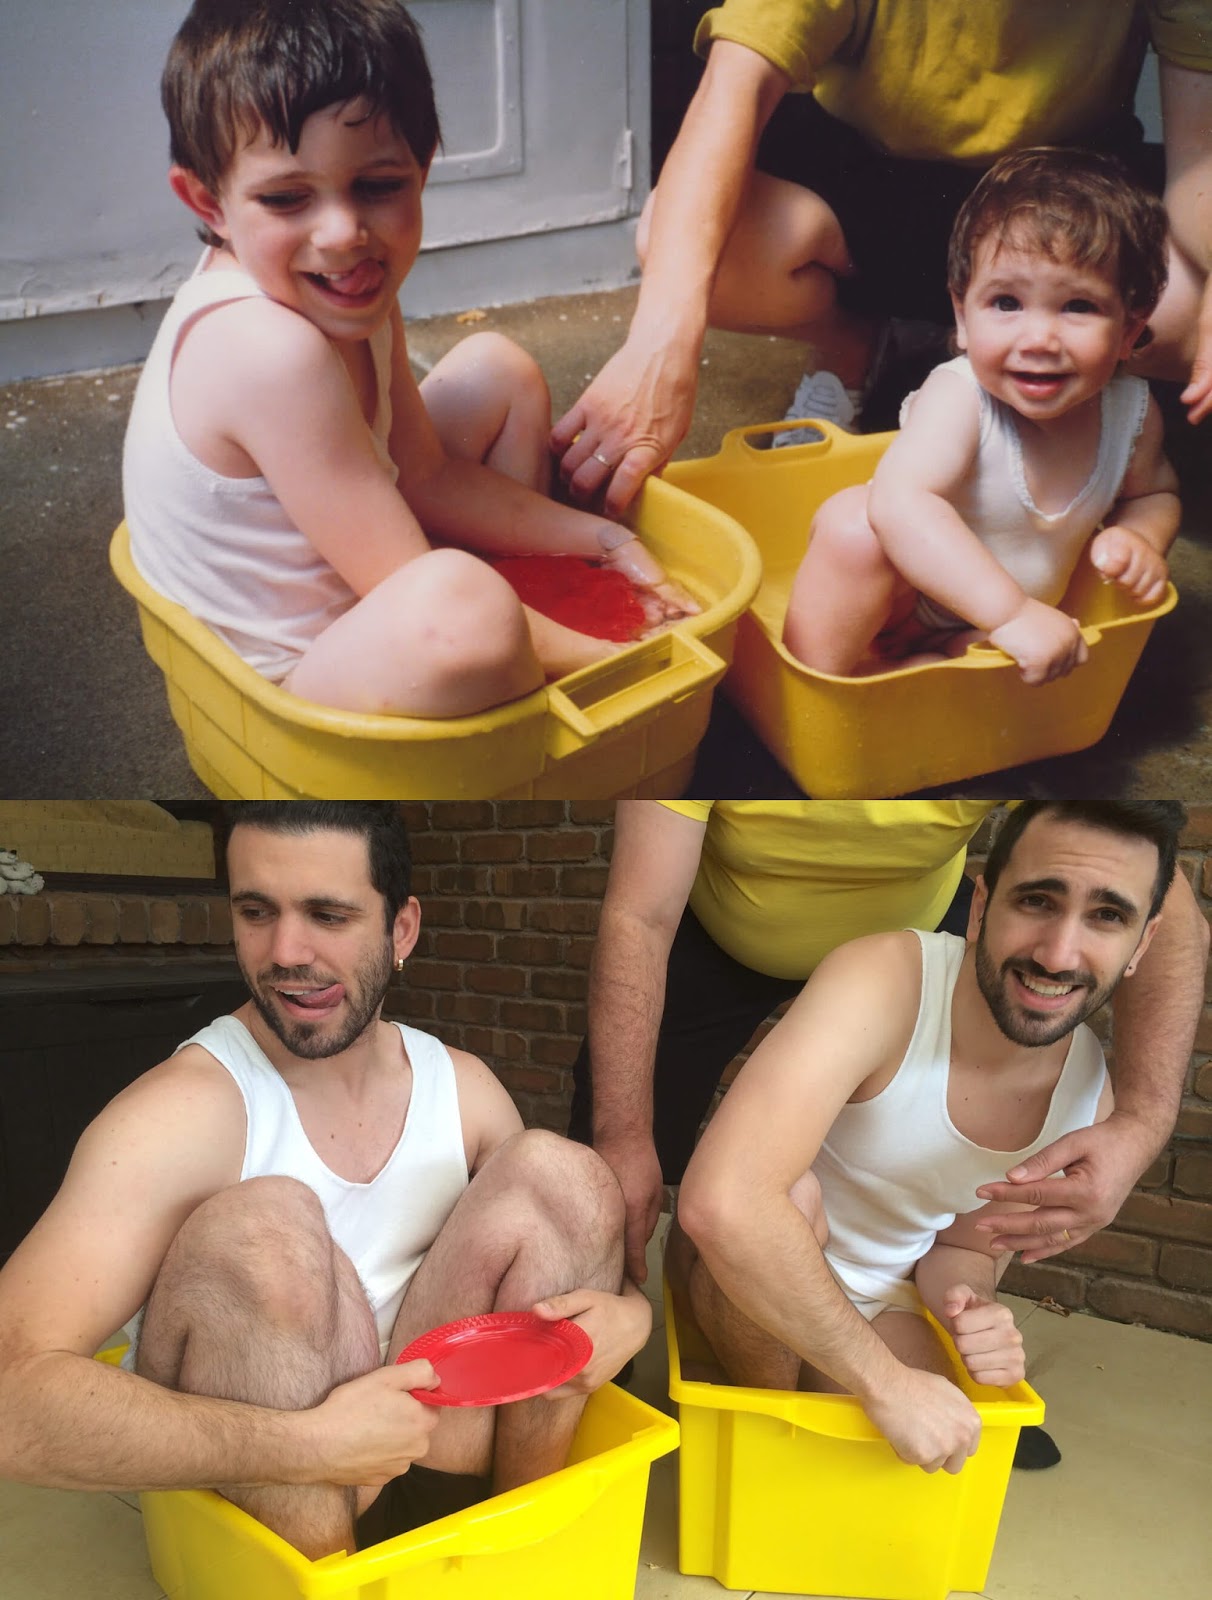 20 Hilarious Before And After Pictures Made By Adults Who Reminisced Their Childhood Years - Perfectly natural family behavior.